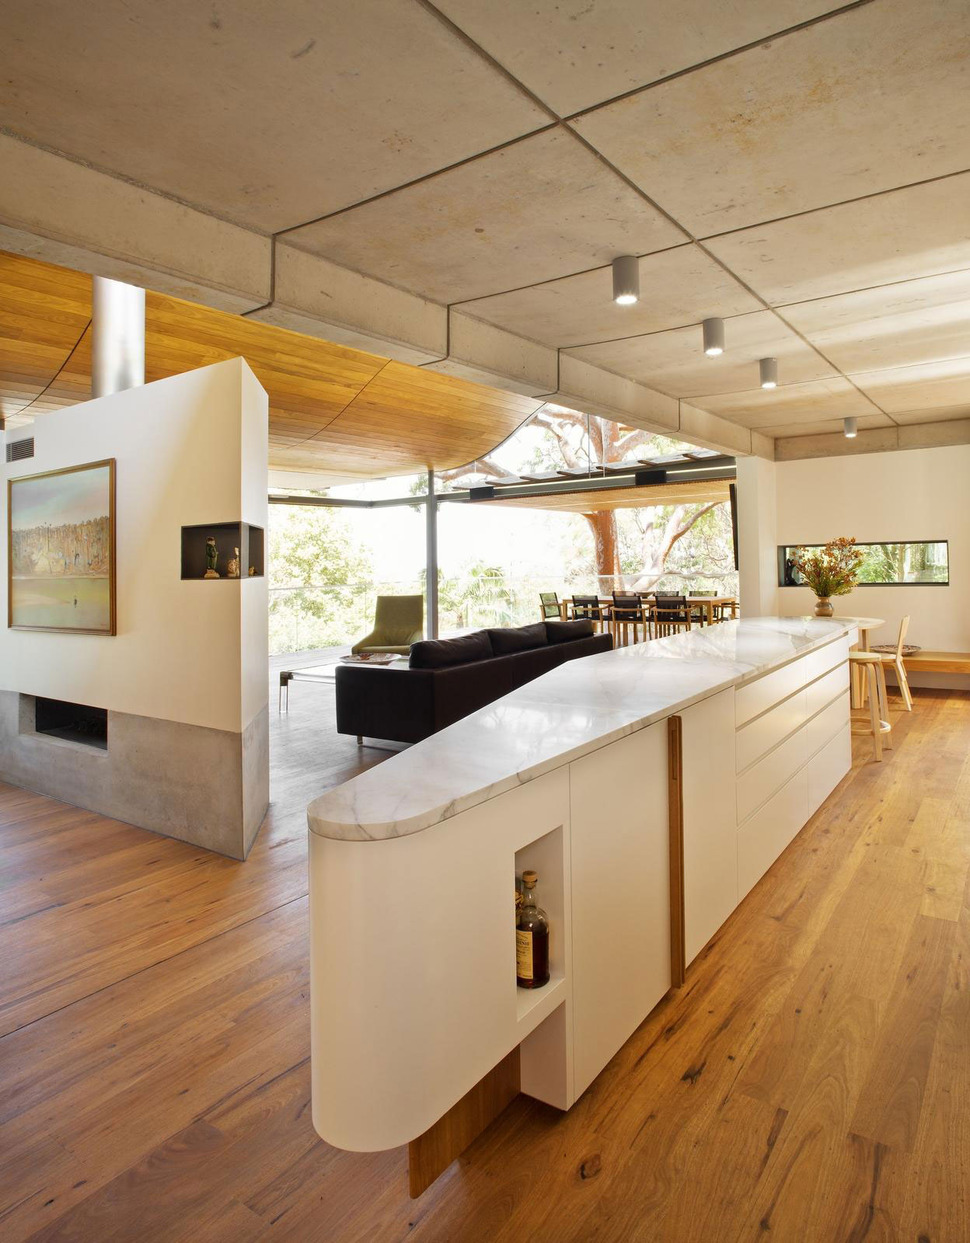 ceiling-wave-upstairs-boulder-wall-downstairs-8-kitchen.jpg